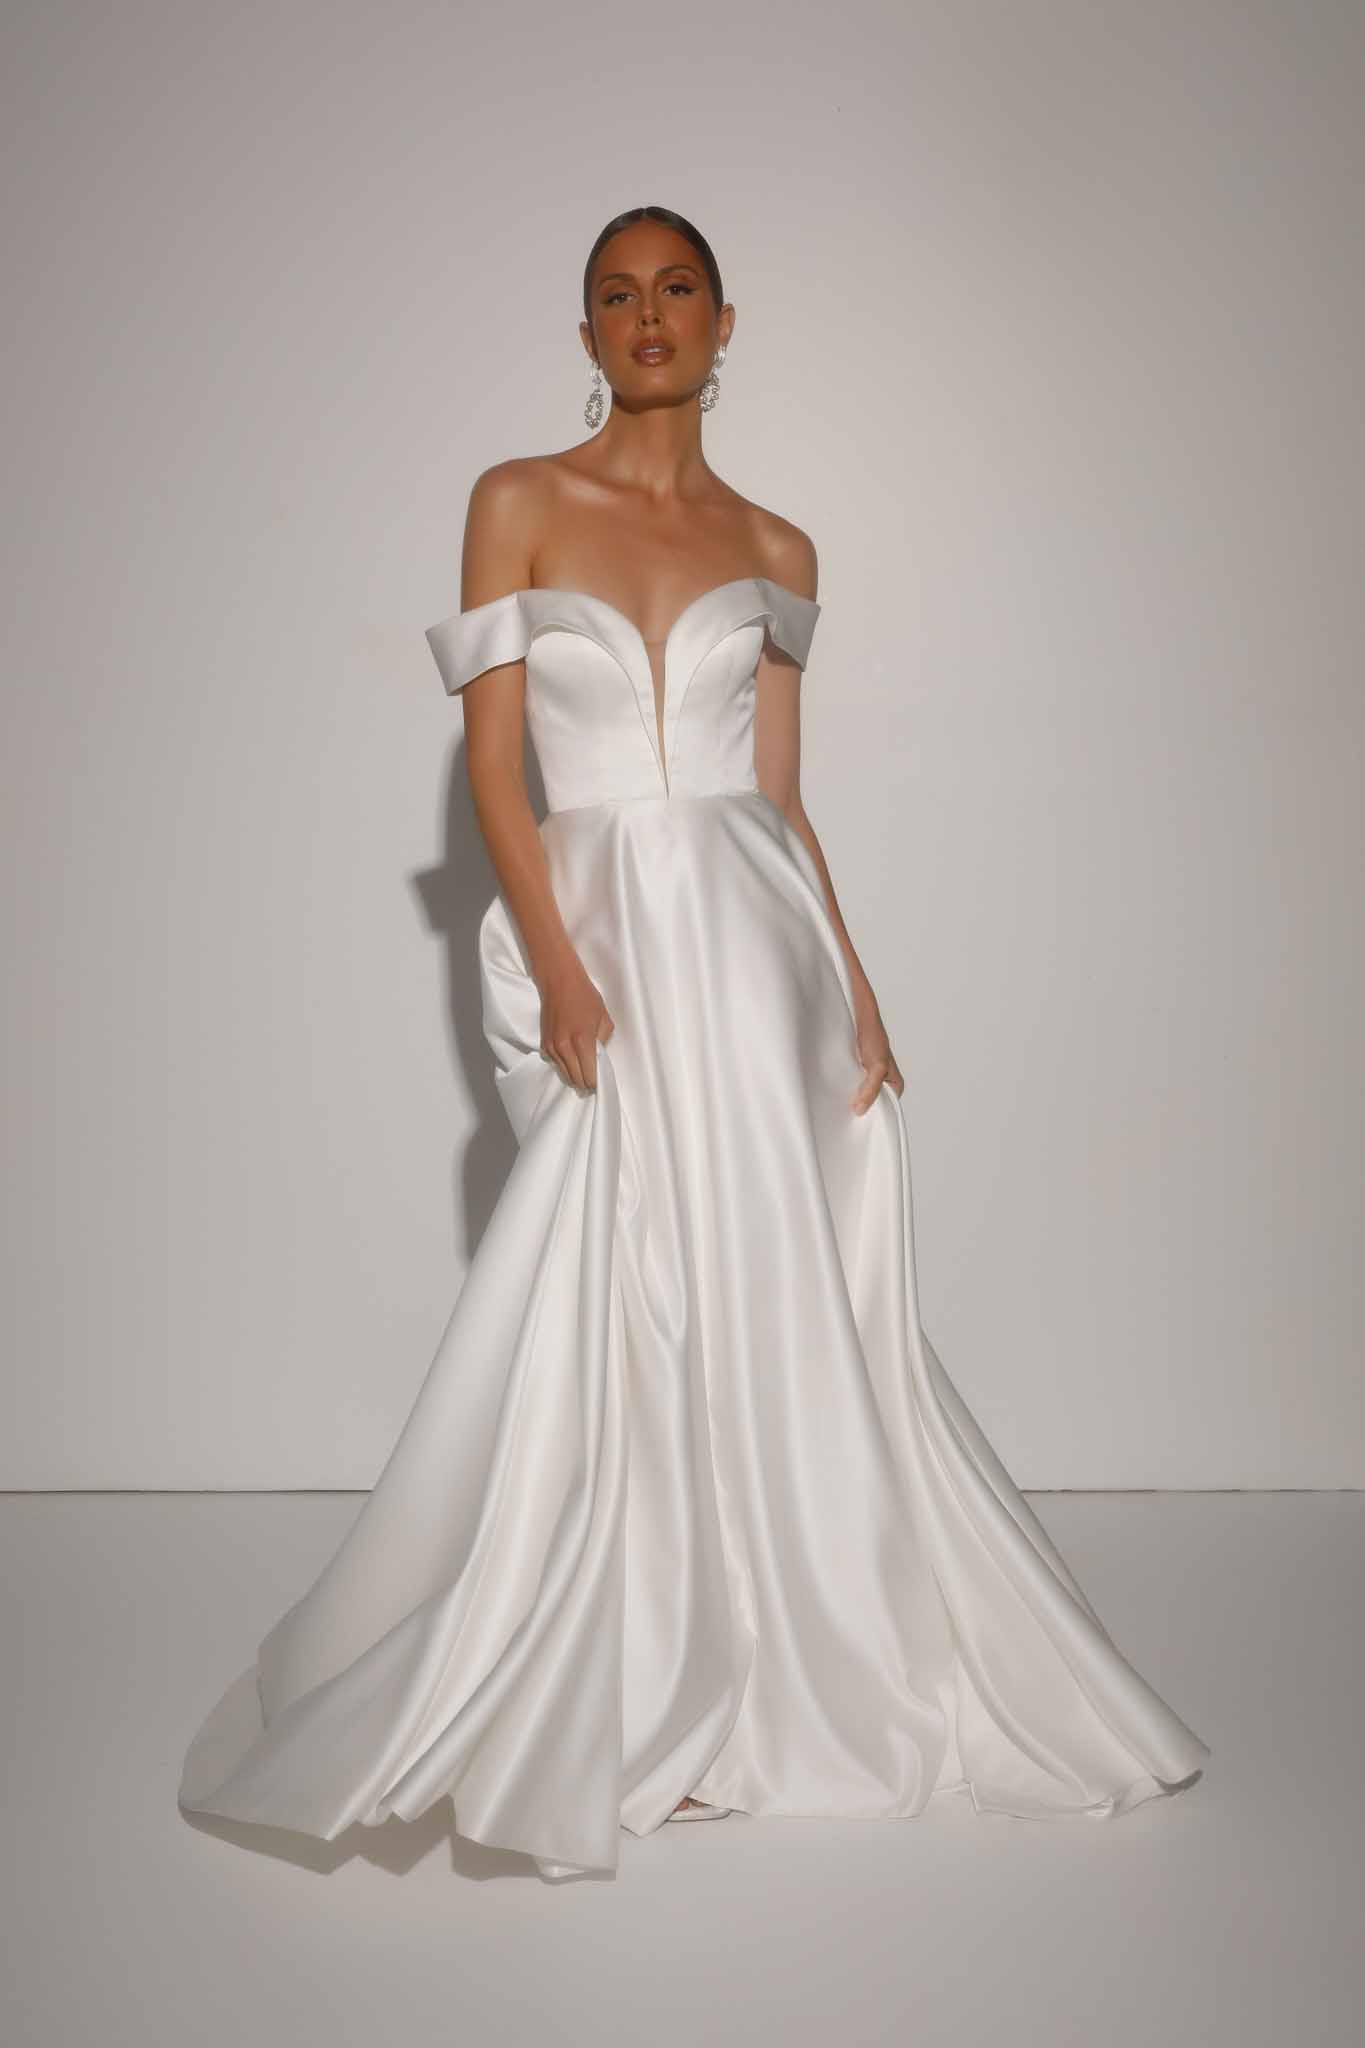 Evie Young Miller wedding gown